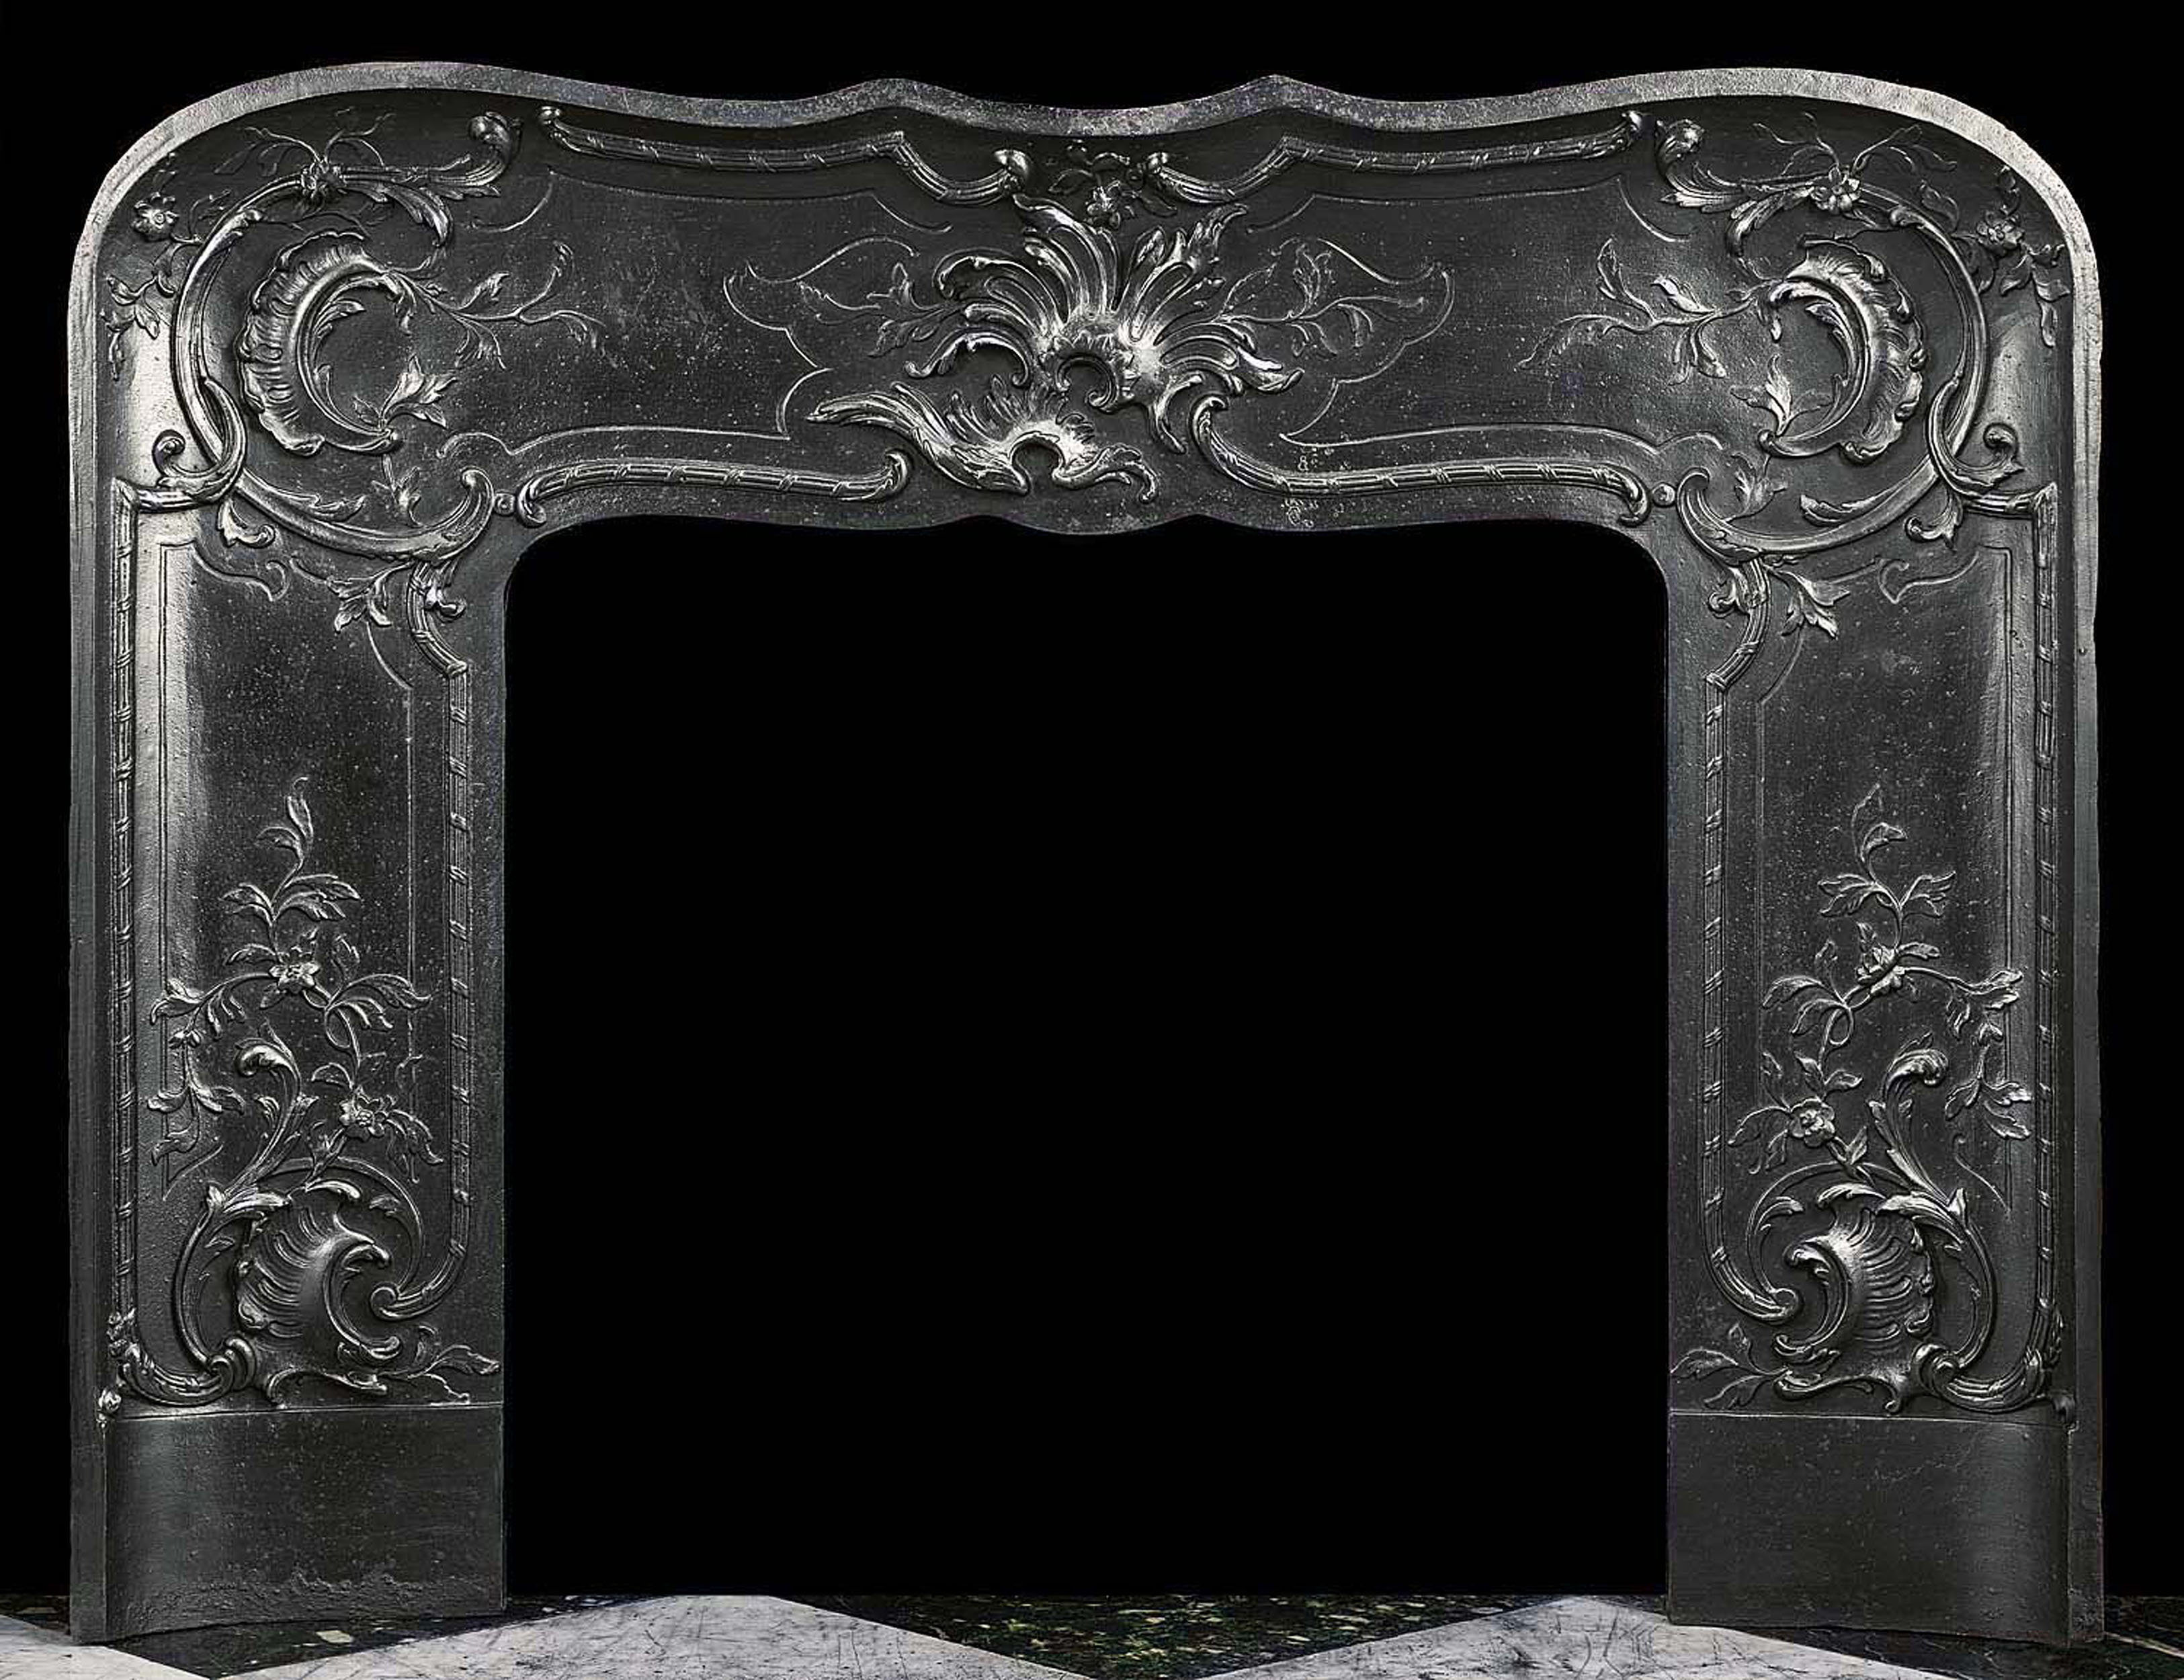  Foliate and Floral cast iron Louis XVI Fireplace Insert   